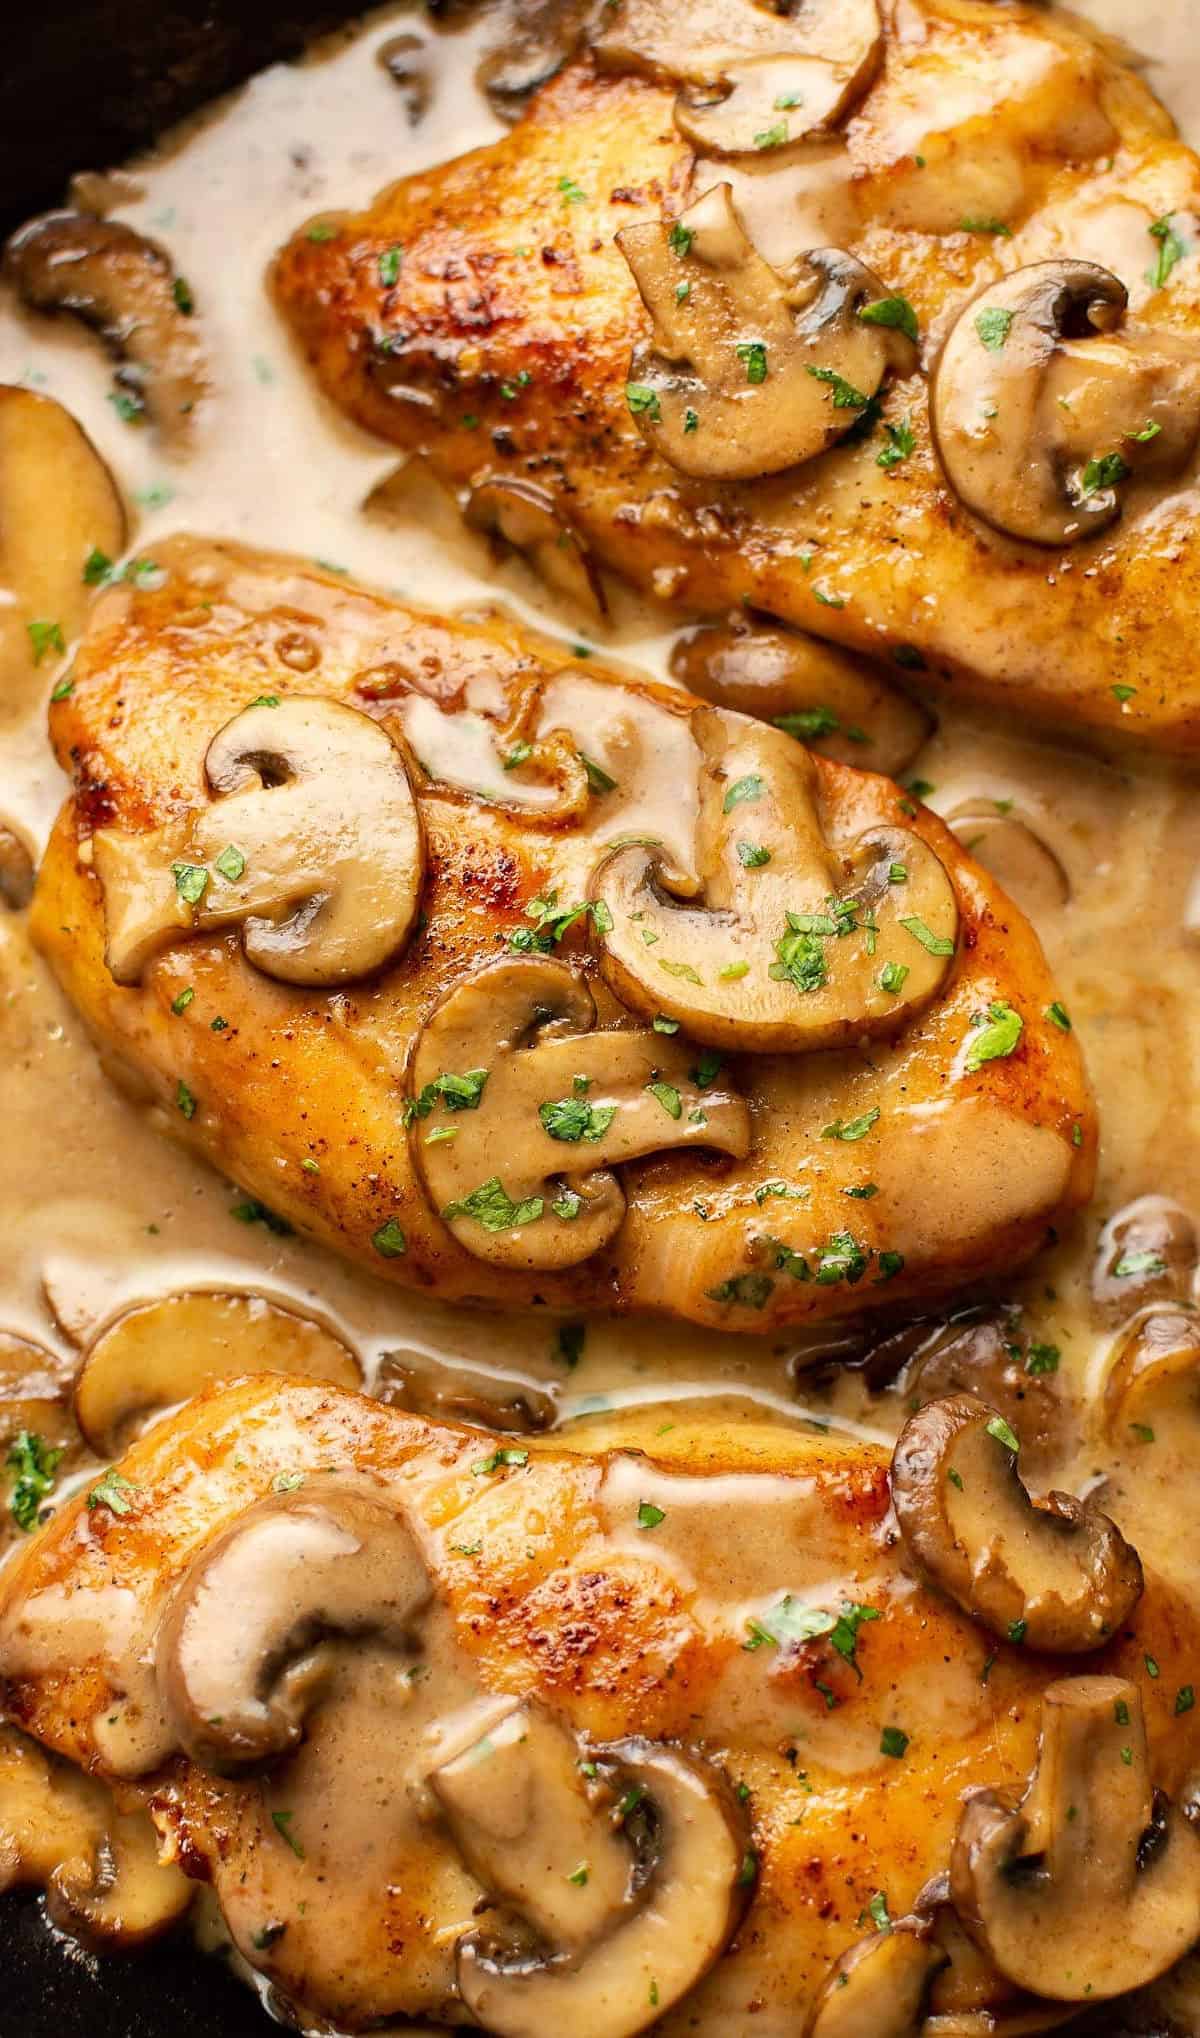  This Rich Chicken Marsala will become your new favorite